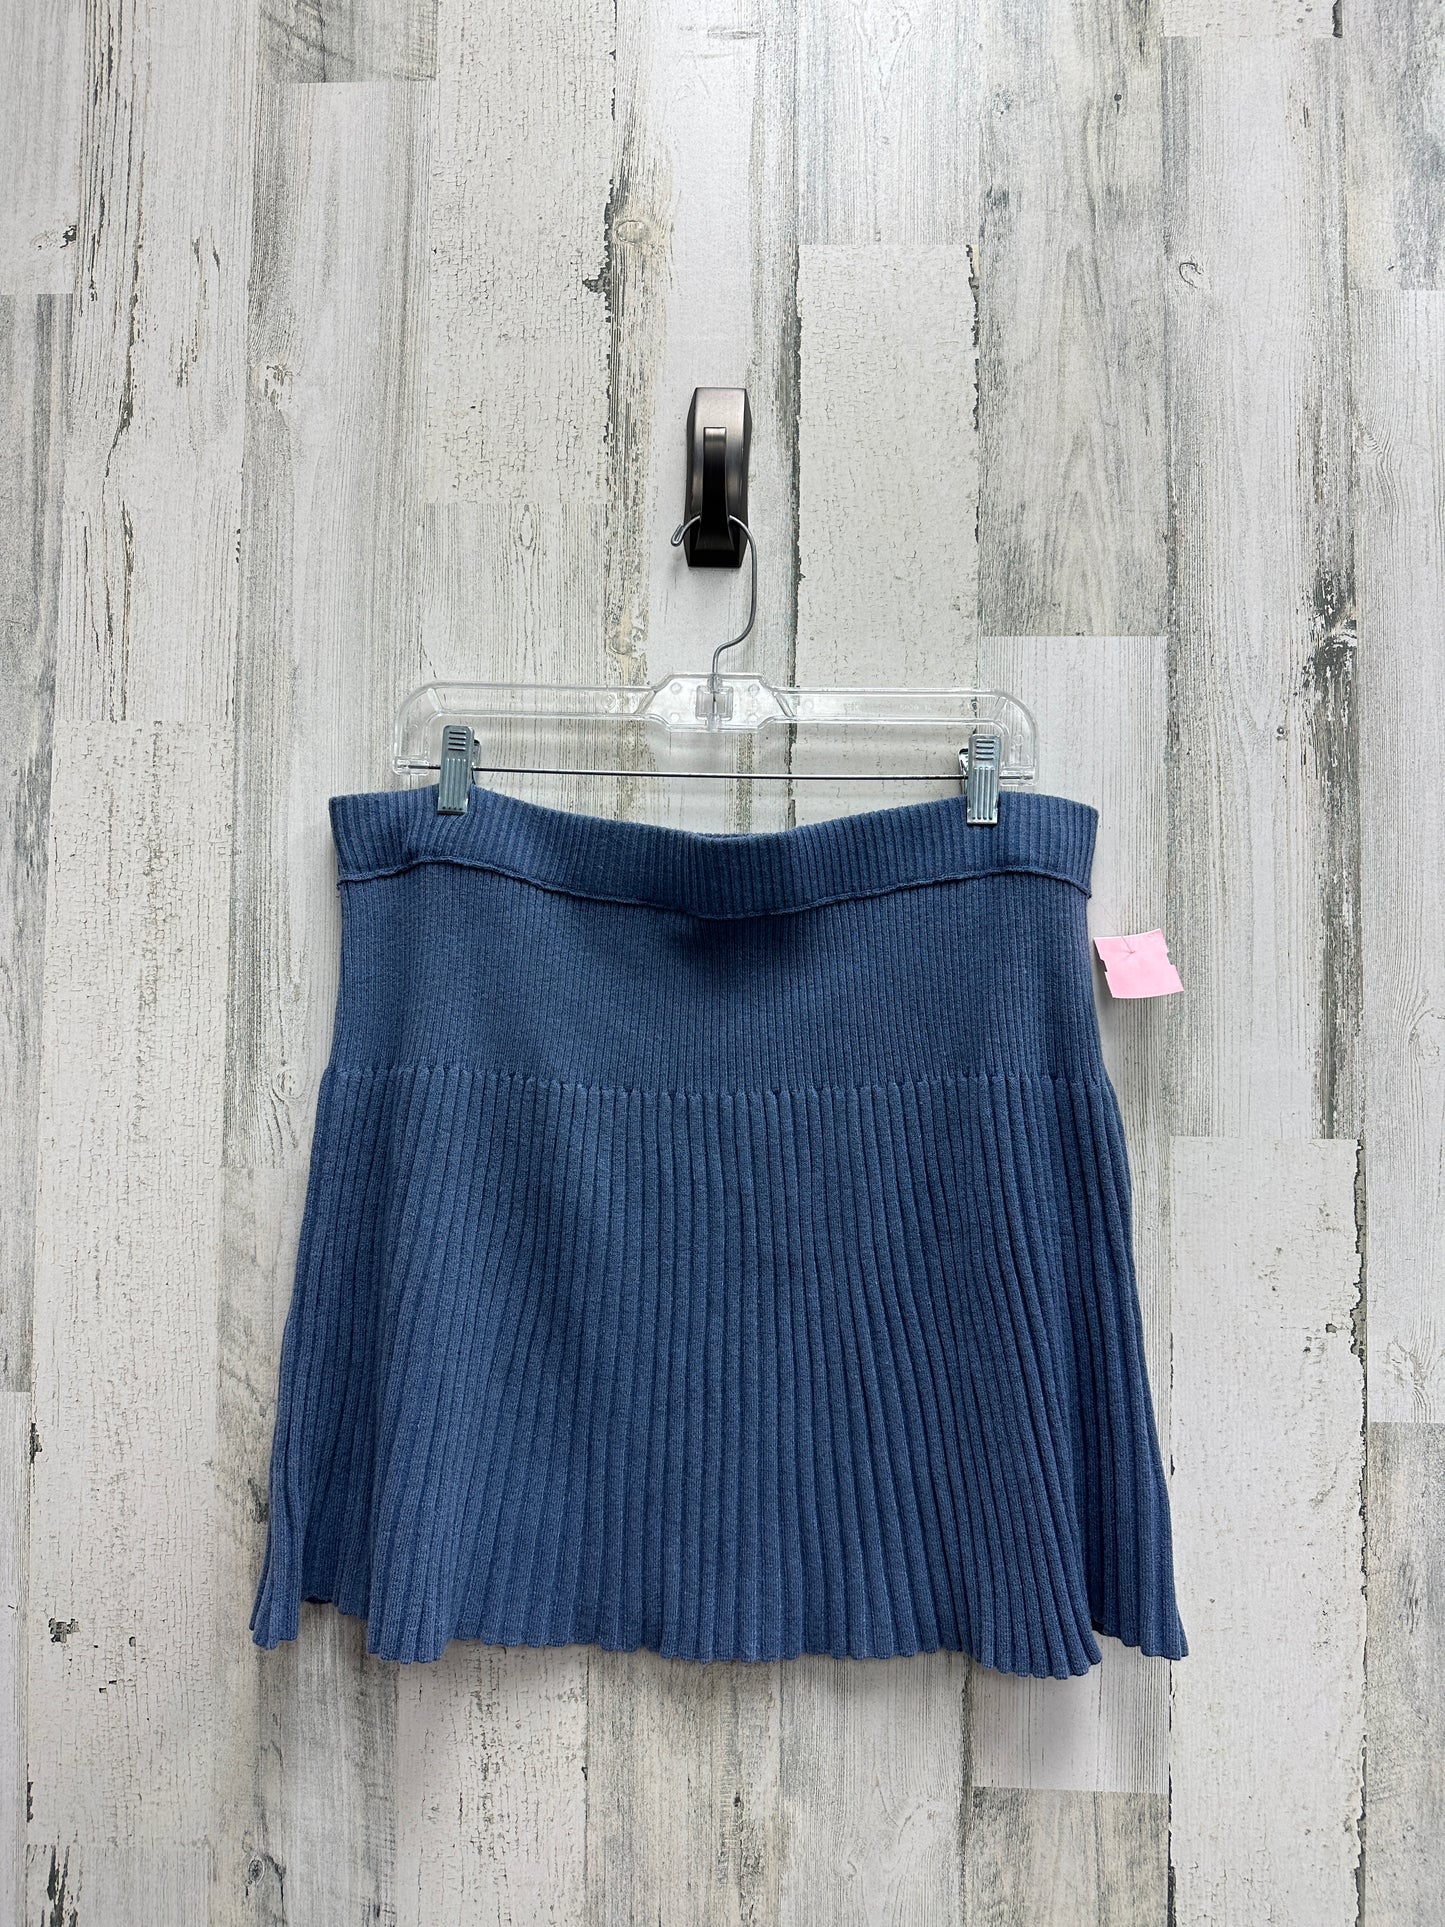 Skirt Mini & Short By Aerie  Size: Xl